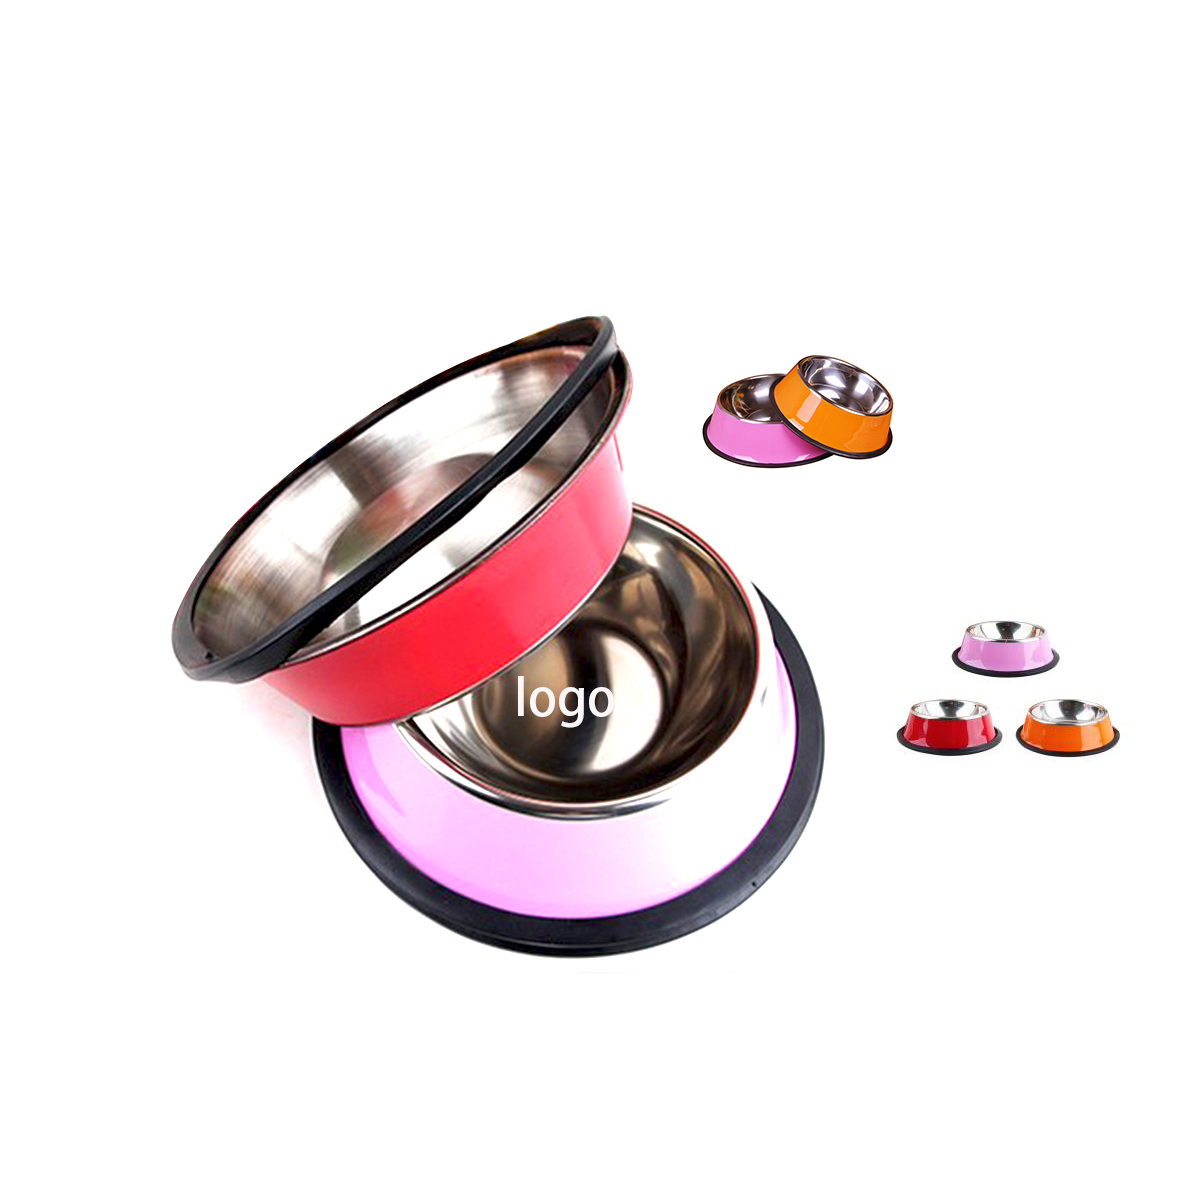 The Colorful Stainless Steel Dog Bowl